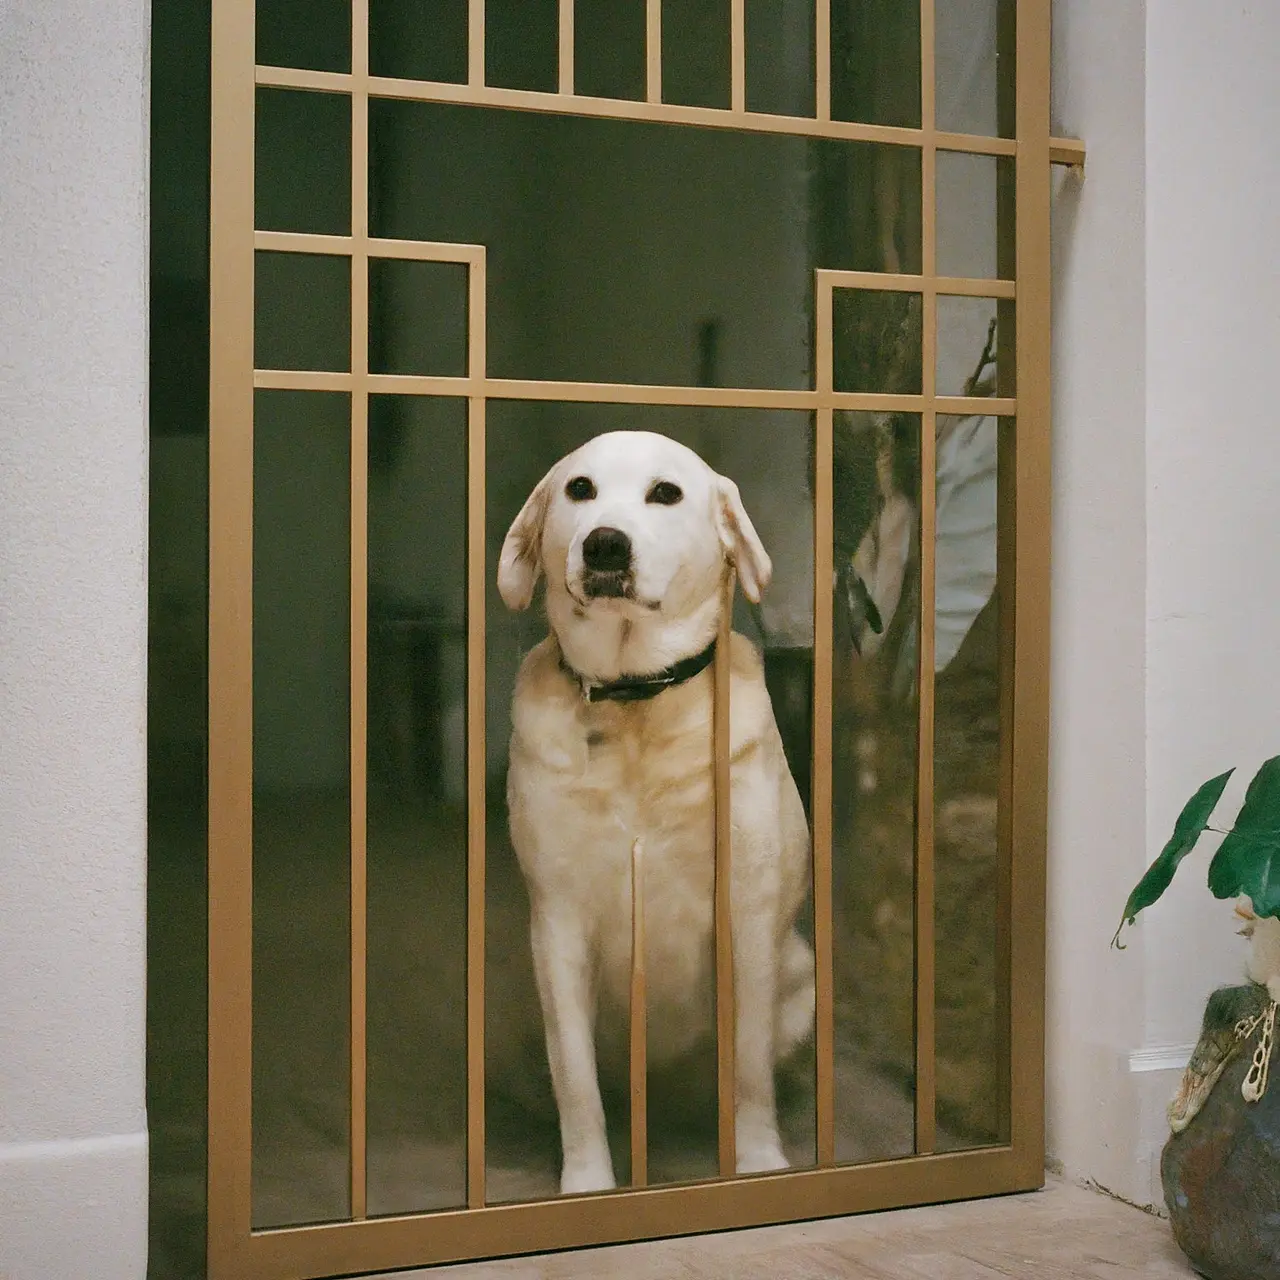 A dog sitting patiently behind a stylish indoor gate. 35mm stock photo